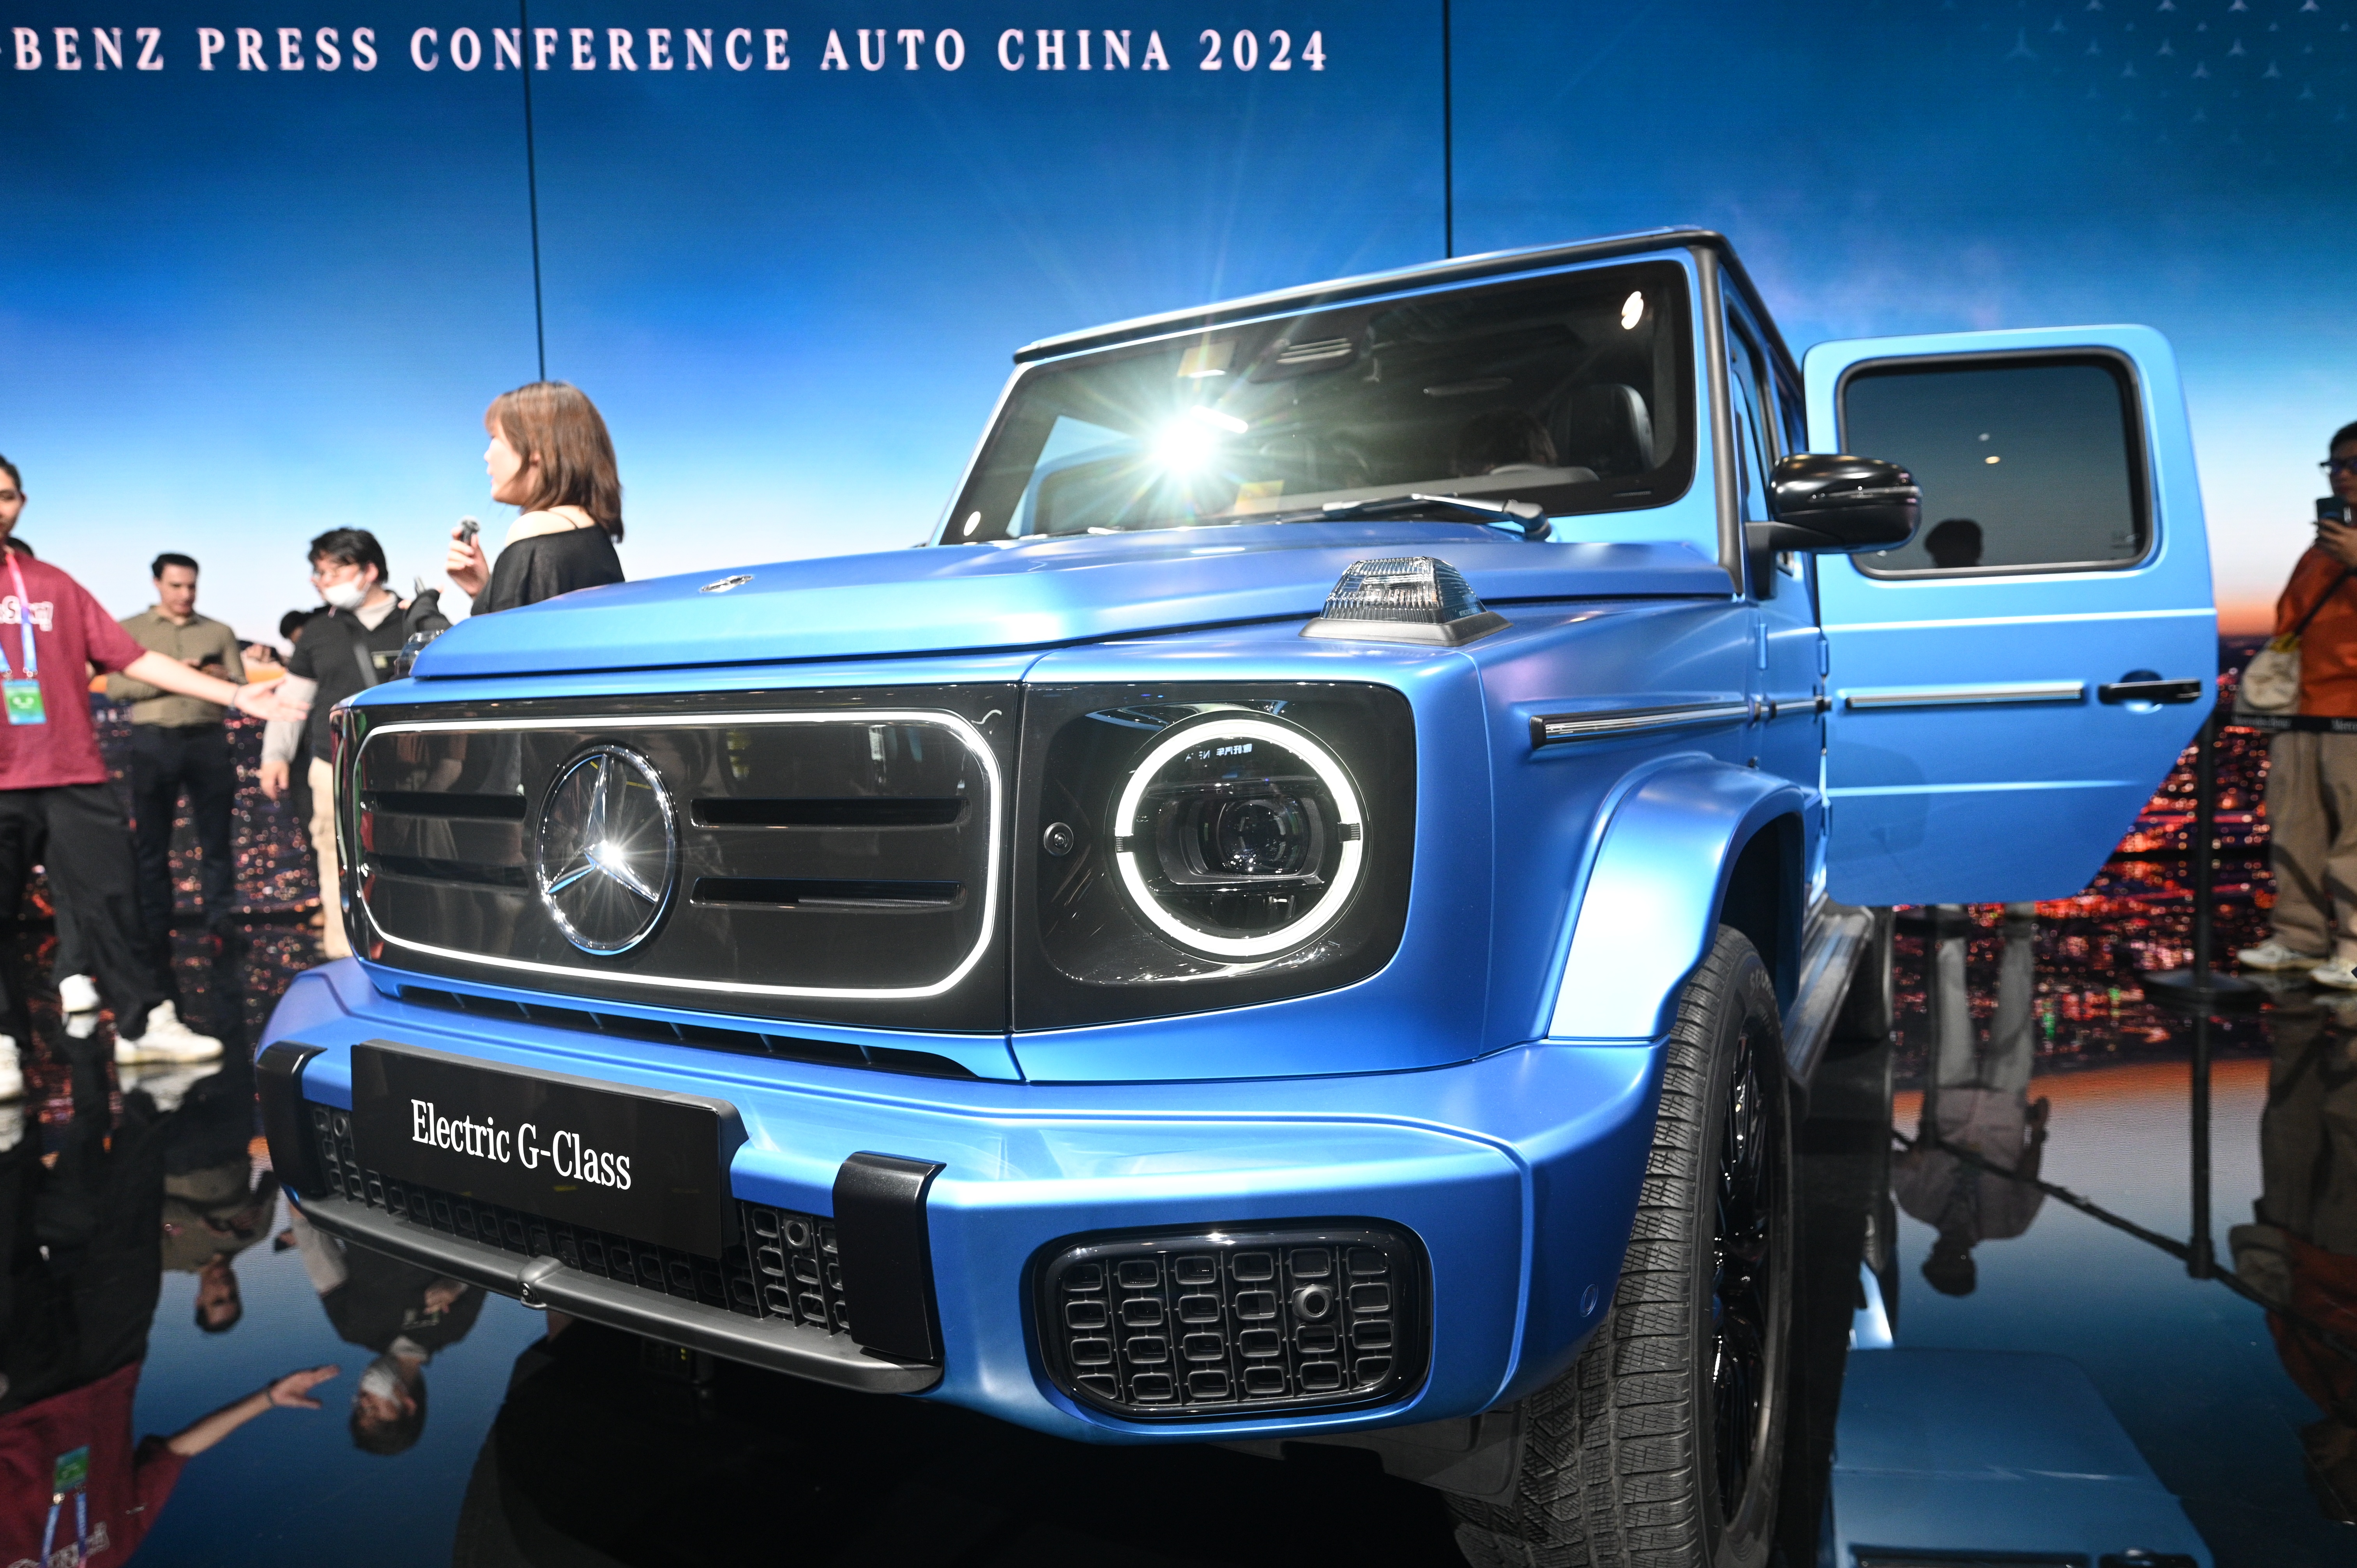 A Mercedes-Benz G-Class electric offroad vehicle is on display during the 2024 Beijing International Automotive Exhibition at China International Exhibition Center in Beijing's Shunyi District, on April 25, 2024. Photo: Ghetty Images 